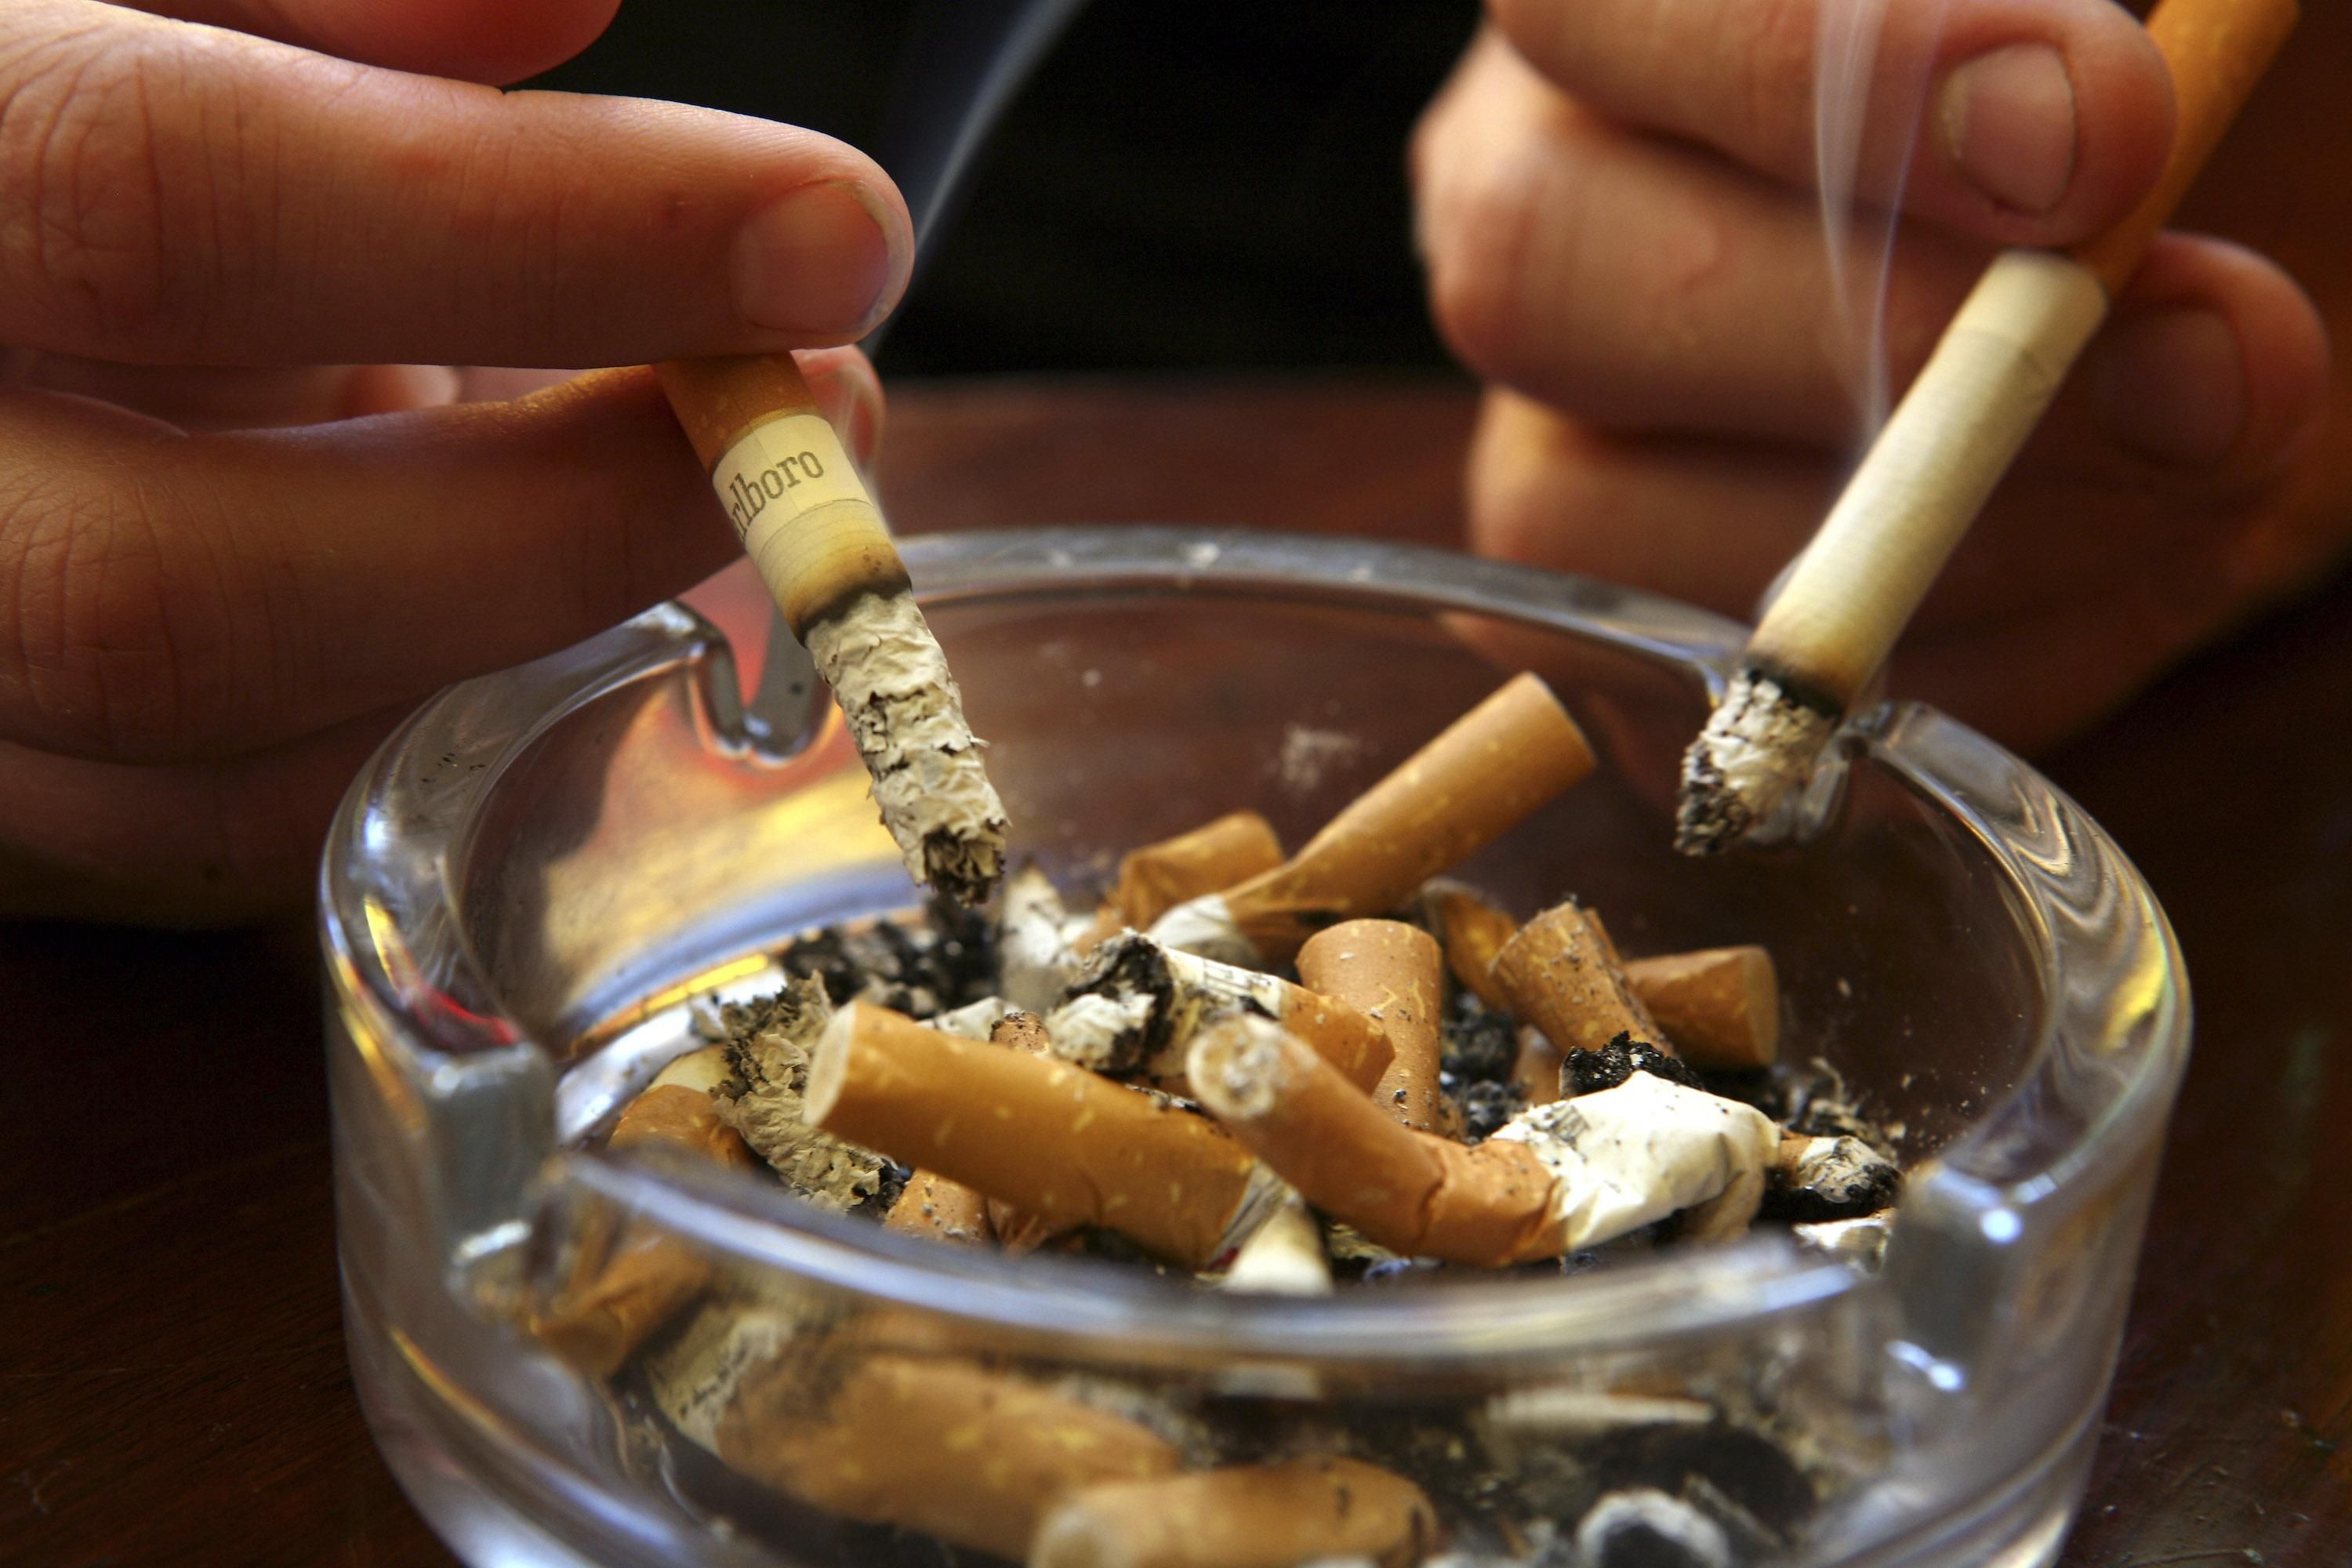 Lit cigarettes are held above a filled ashtray. (Photo: Matt Cardy/Getty Images)